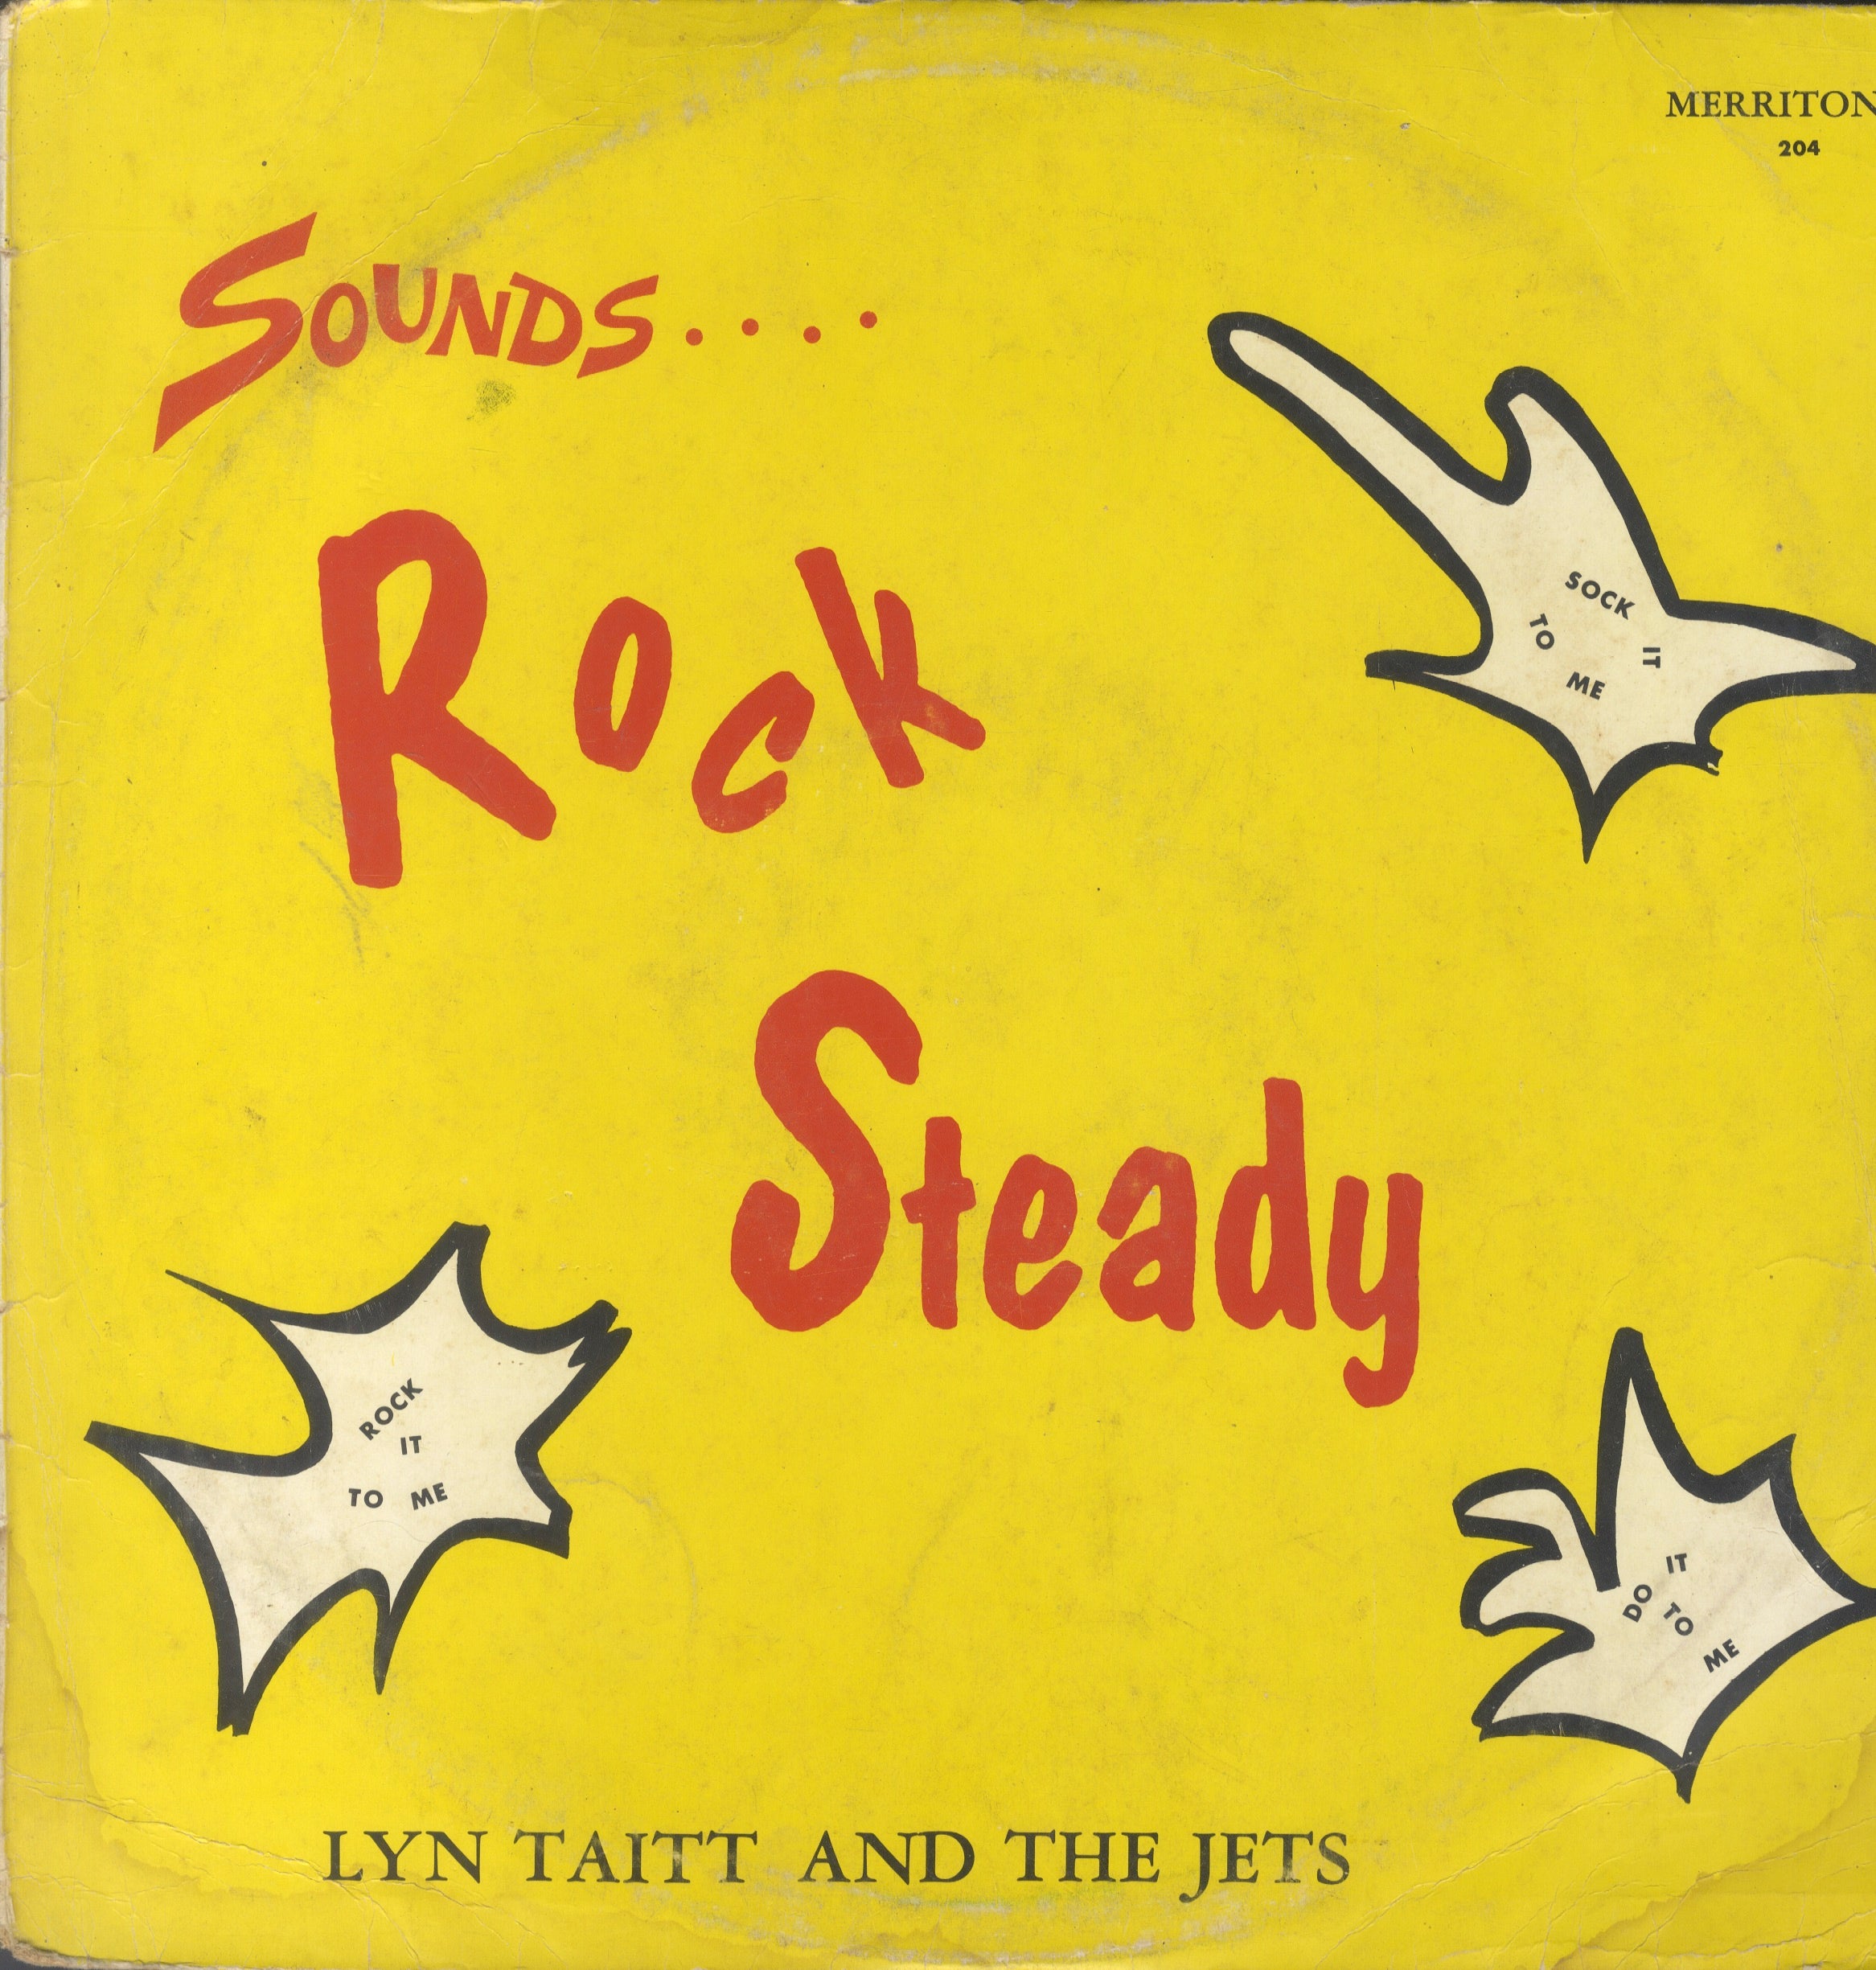 LYN TAIT AND THE JETS [Sounds Rock Steady]